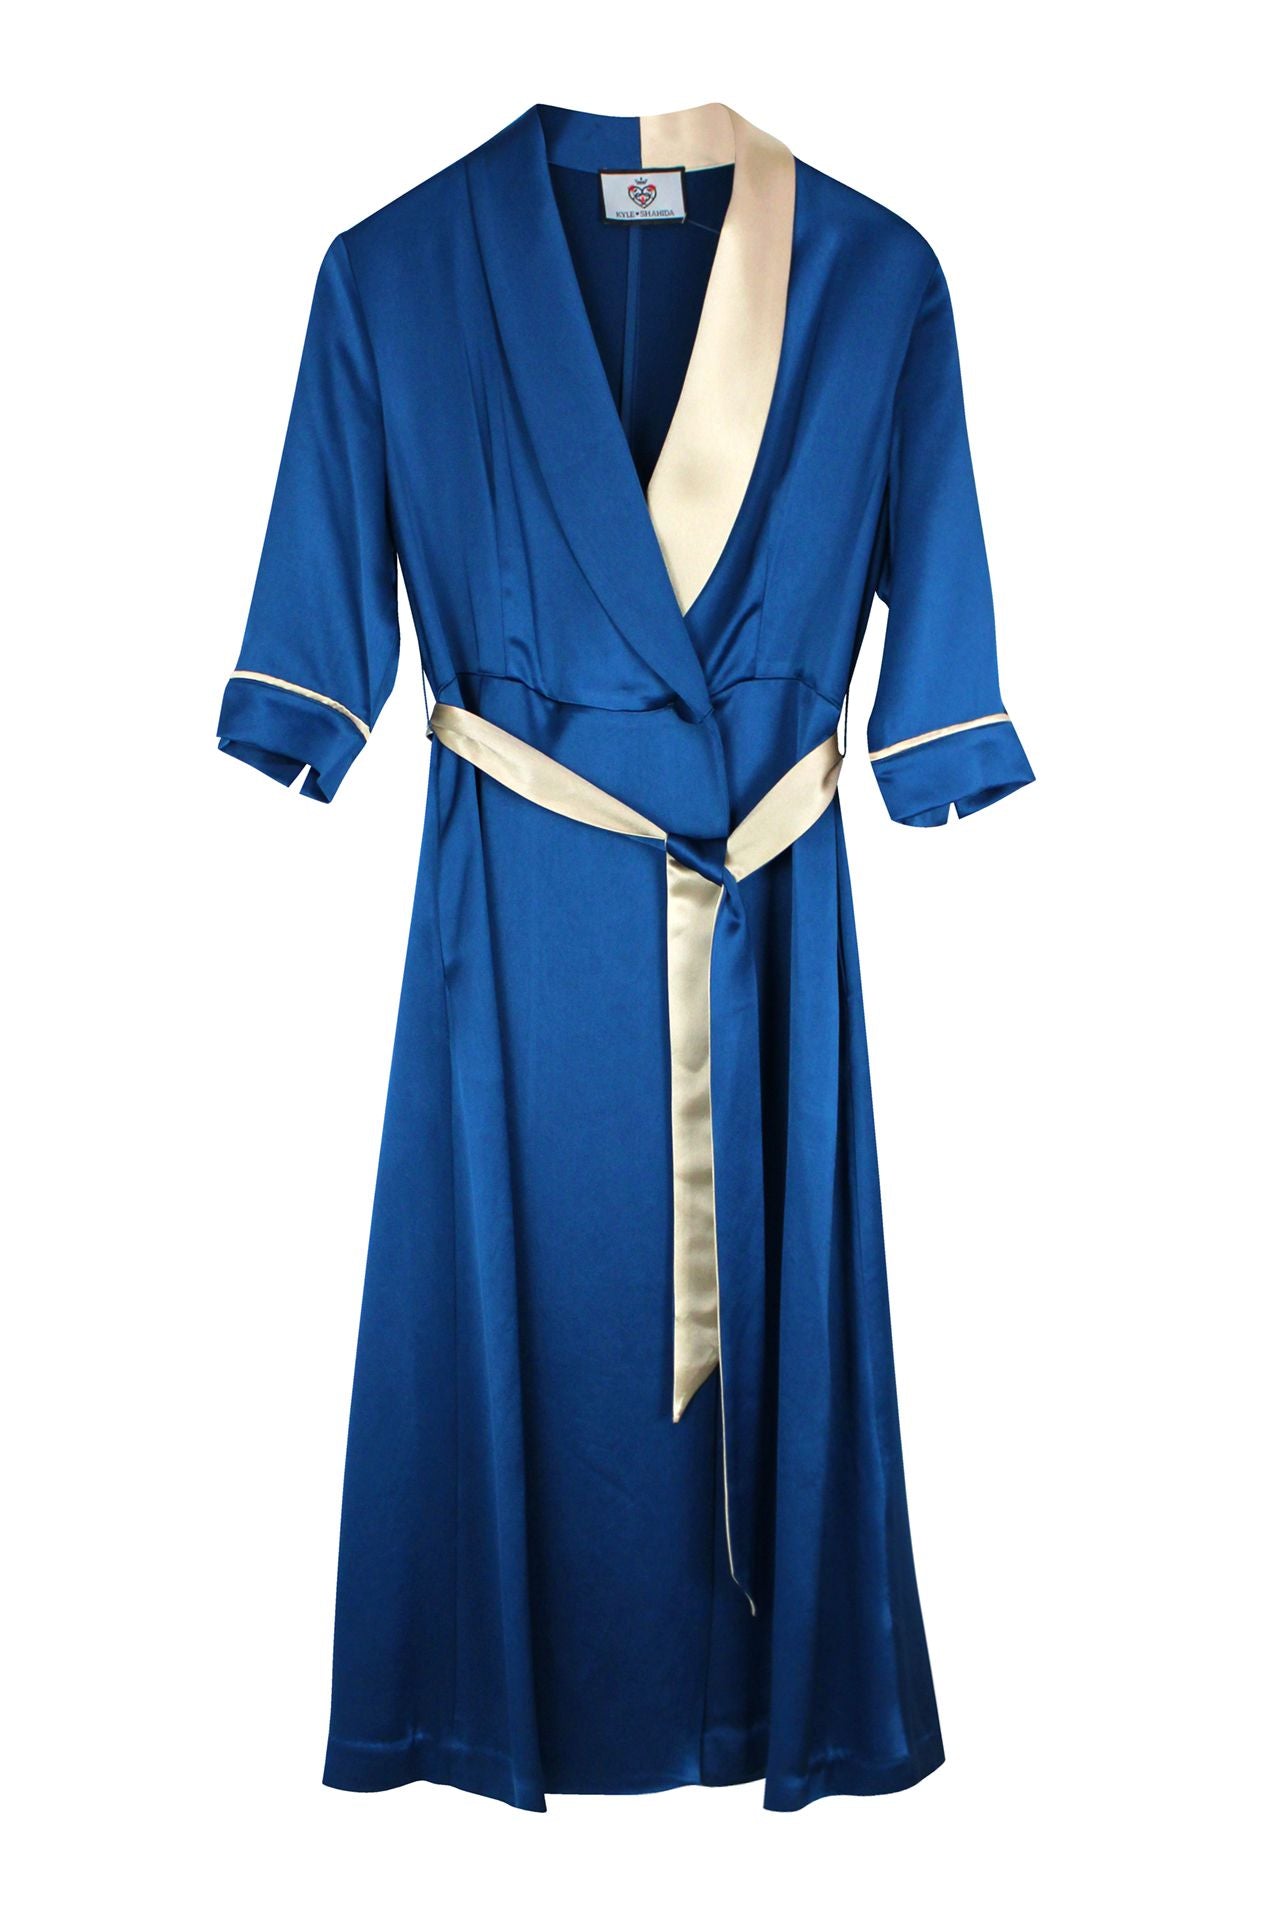 Blue-Belted-Robe-Dress-By-Kyle-Richard